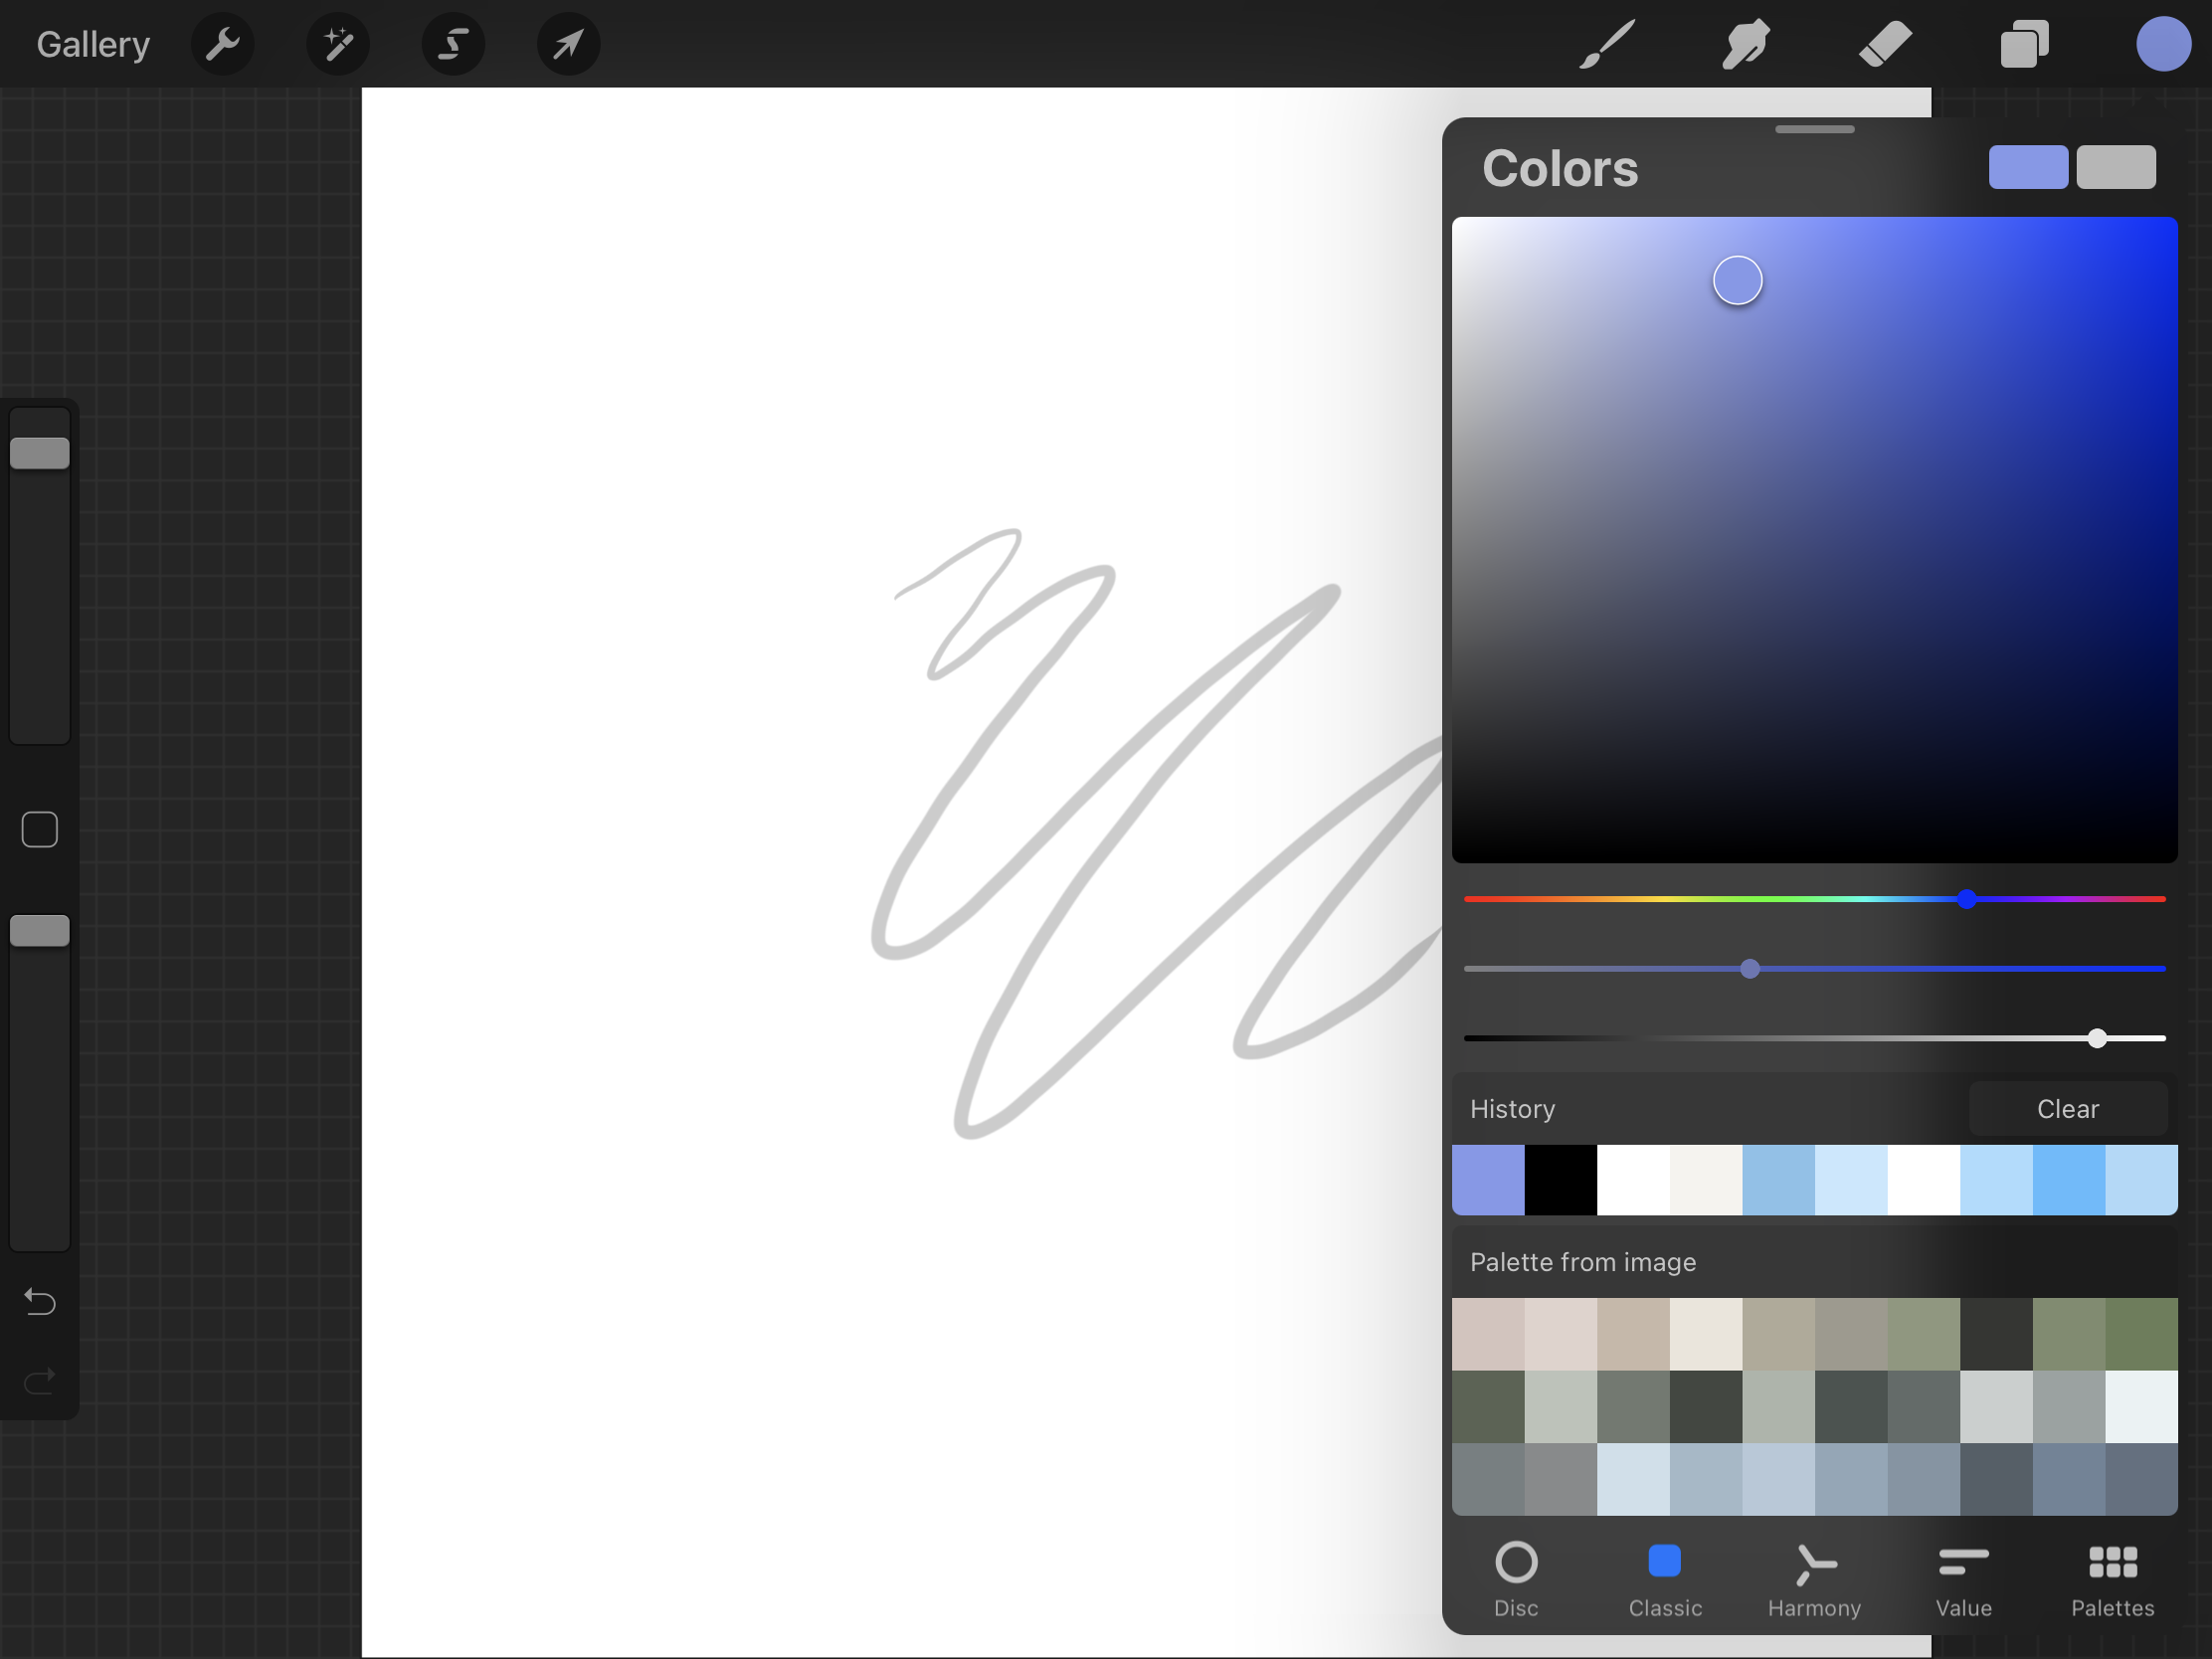 It shows the color palette of the application.